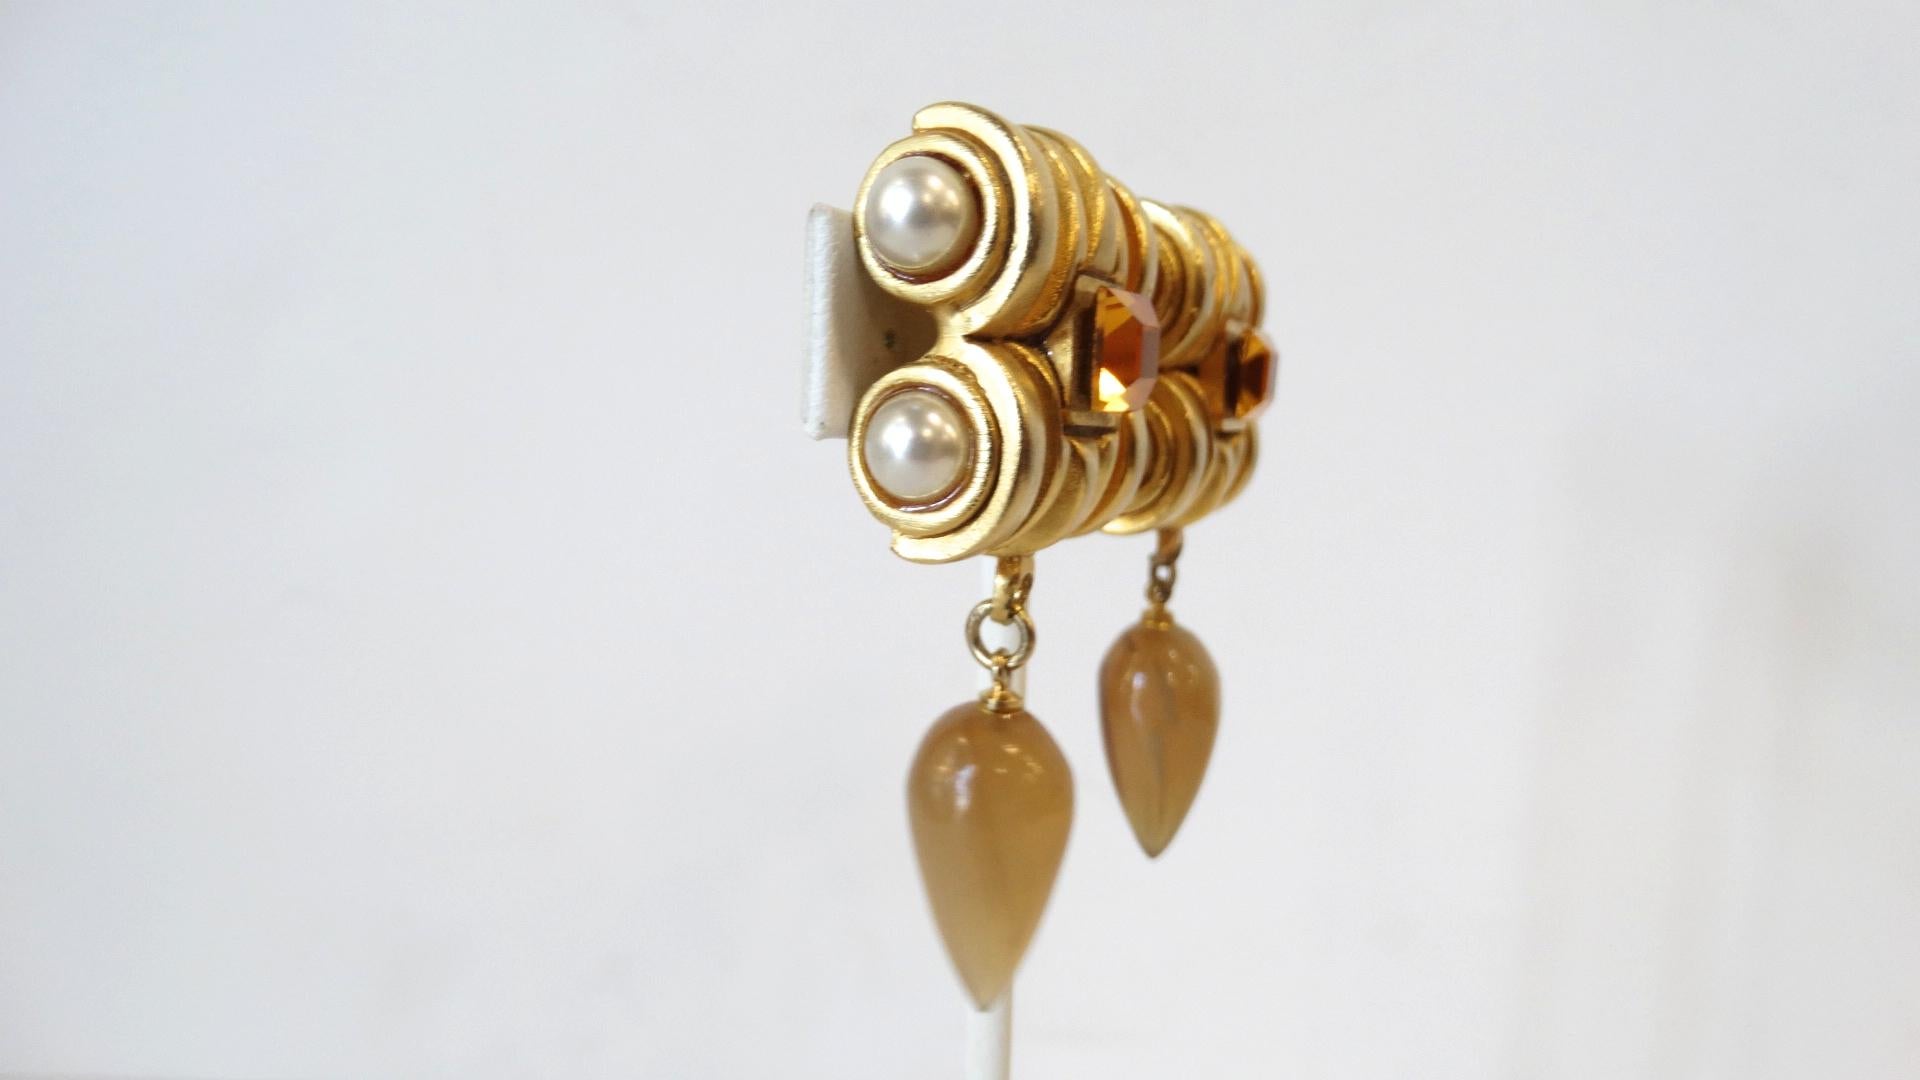 Your Perfect Earrings For Fall Have Arrived! A gold plated top resembling an Ionic Greek column features four pearls and an Amber rhinestone in the center. Hanging off the structured clip on closure top is a tear drop Amber Crystal. Unsigned.